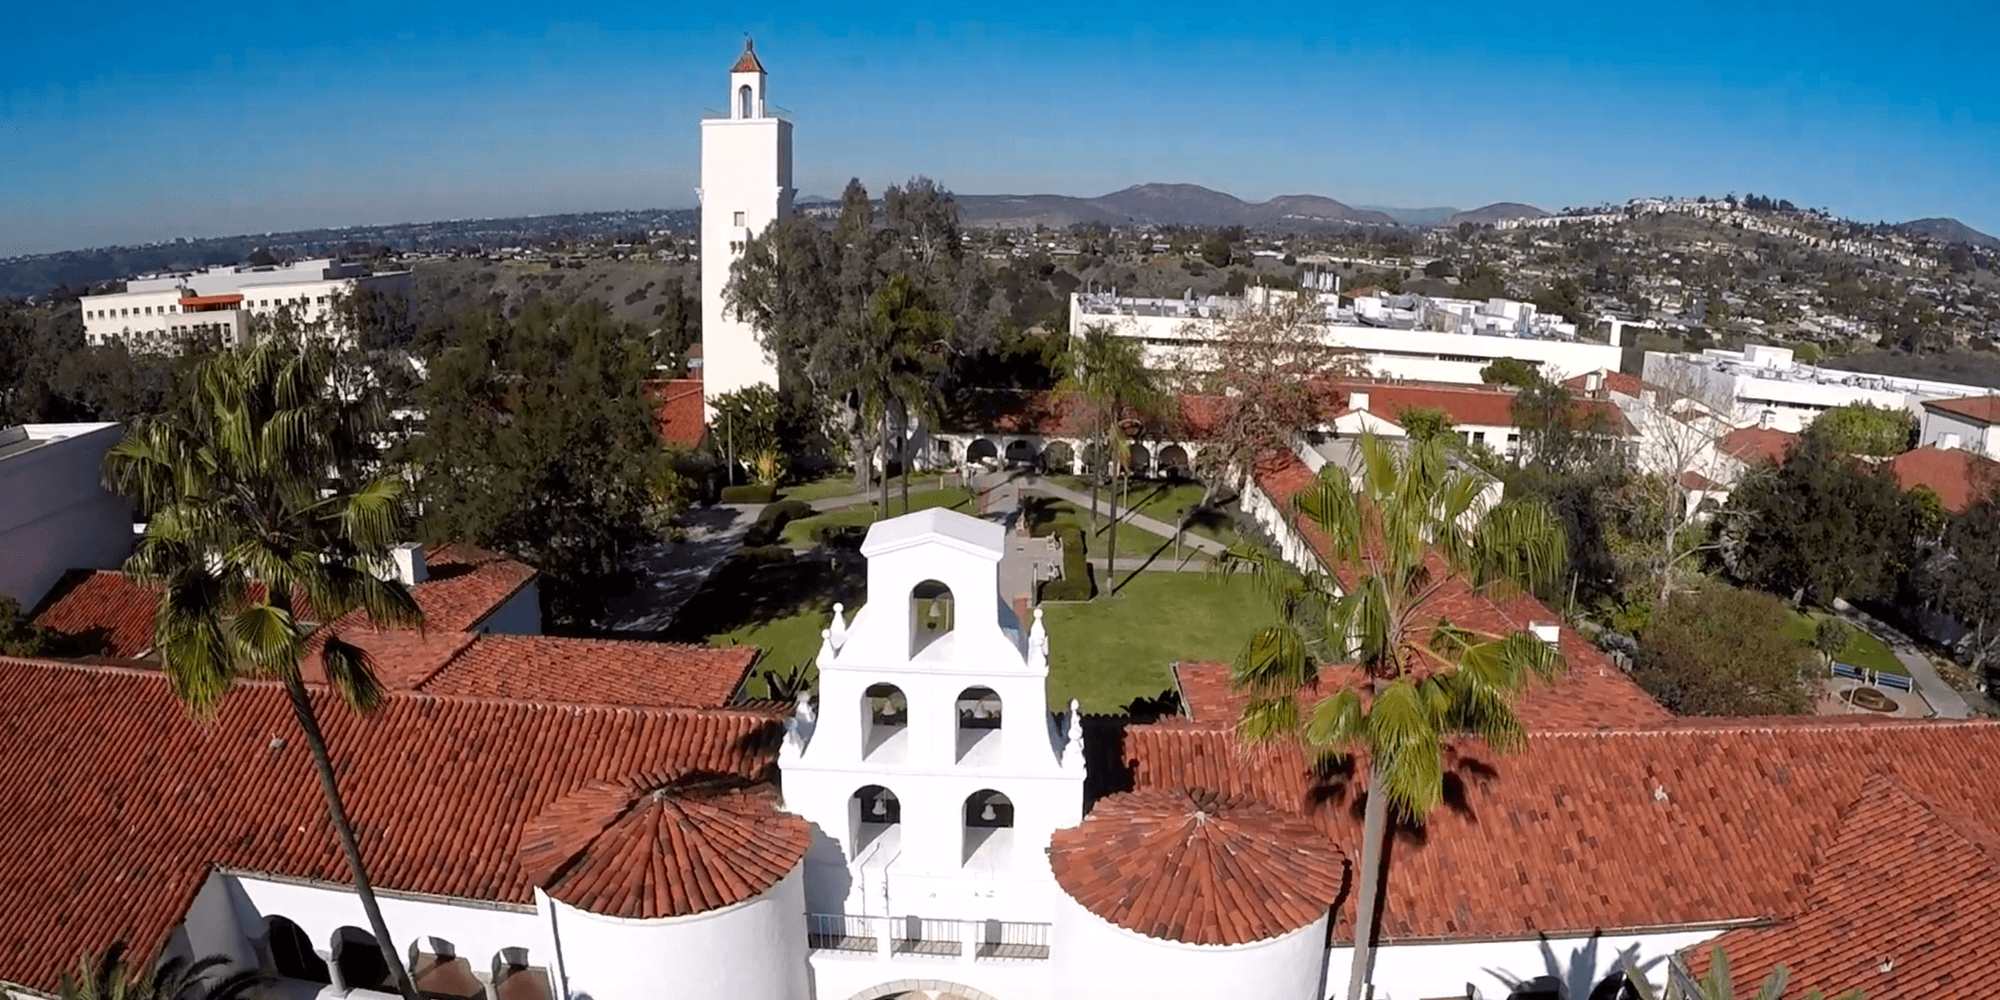 Tutoring Services at San Diego State University